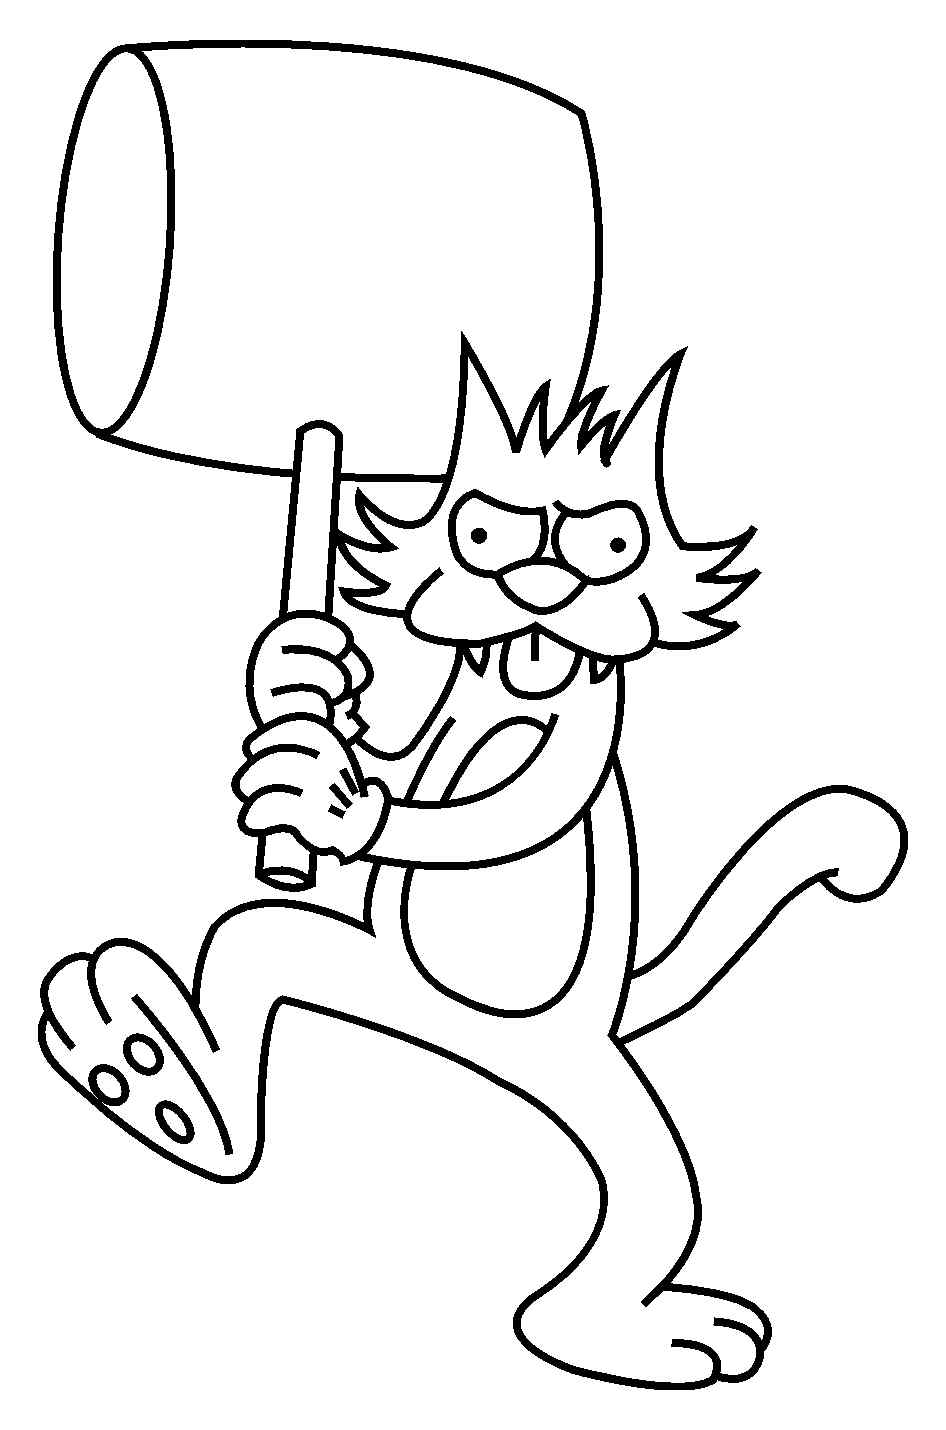 Simpsons With Tool Coloring Page